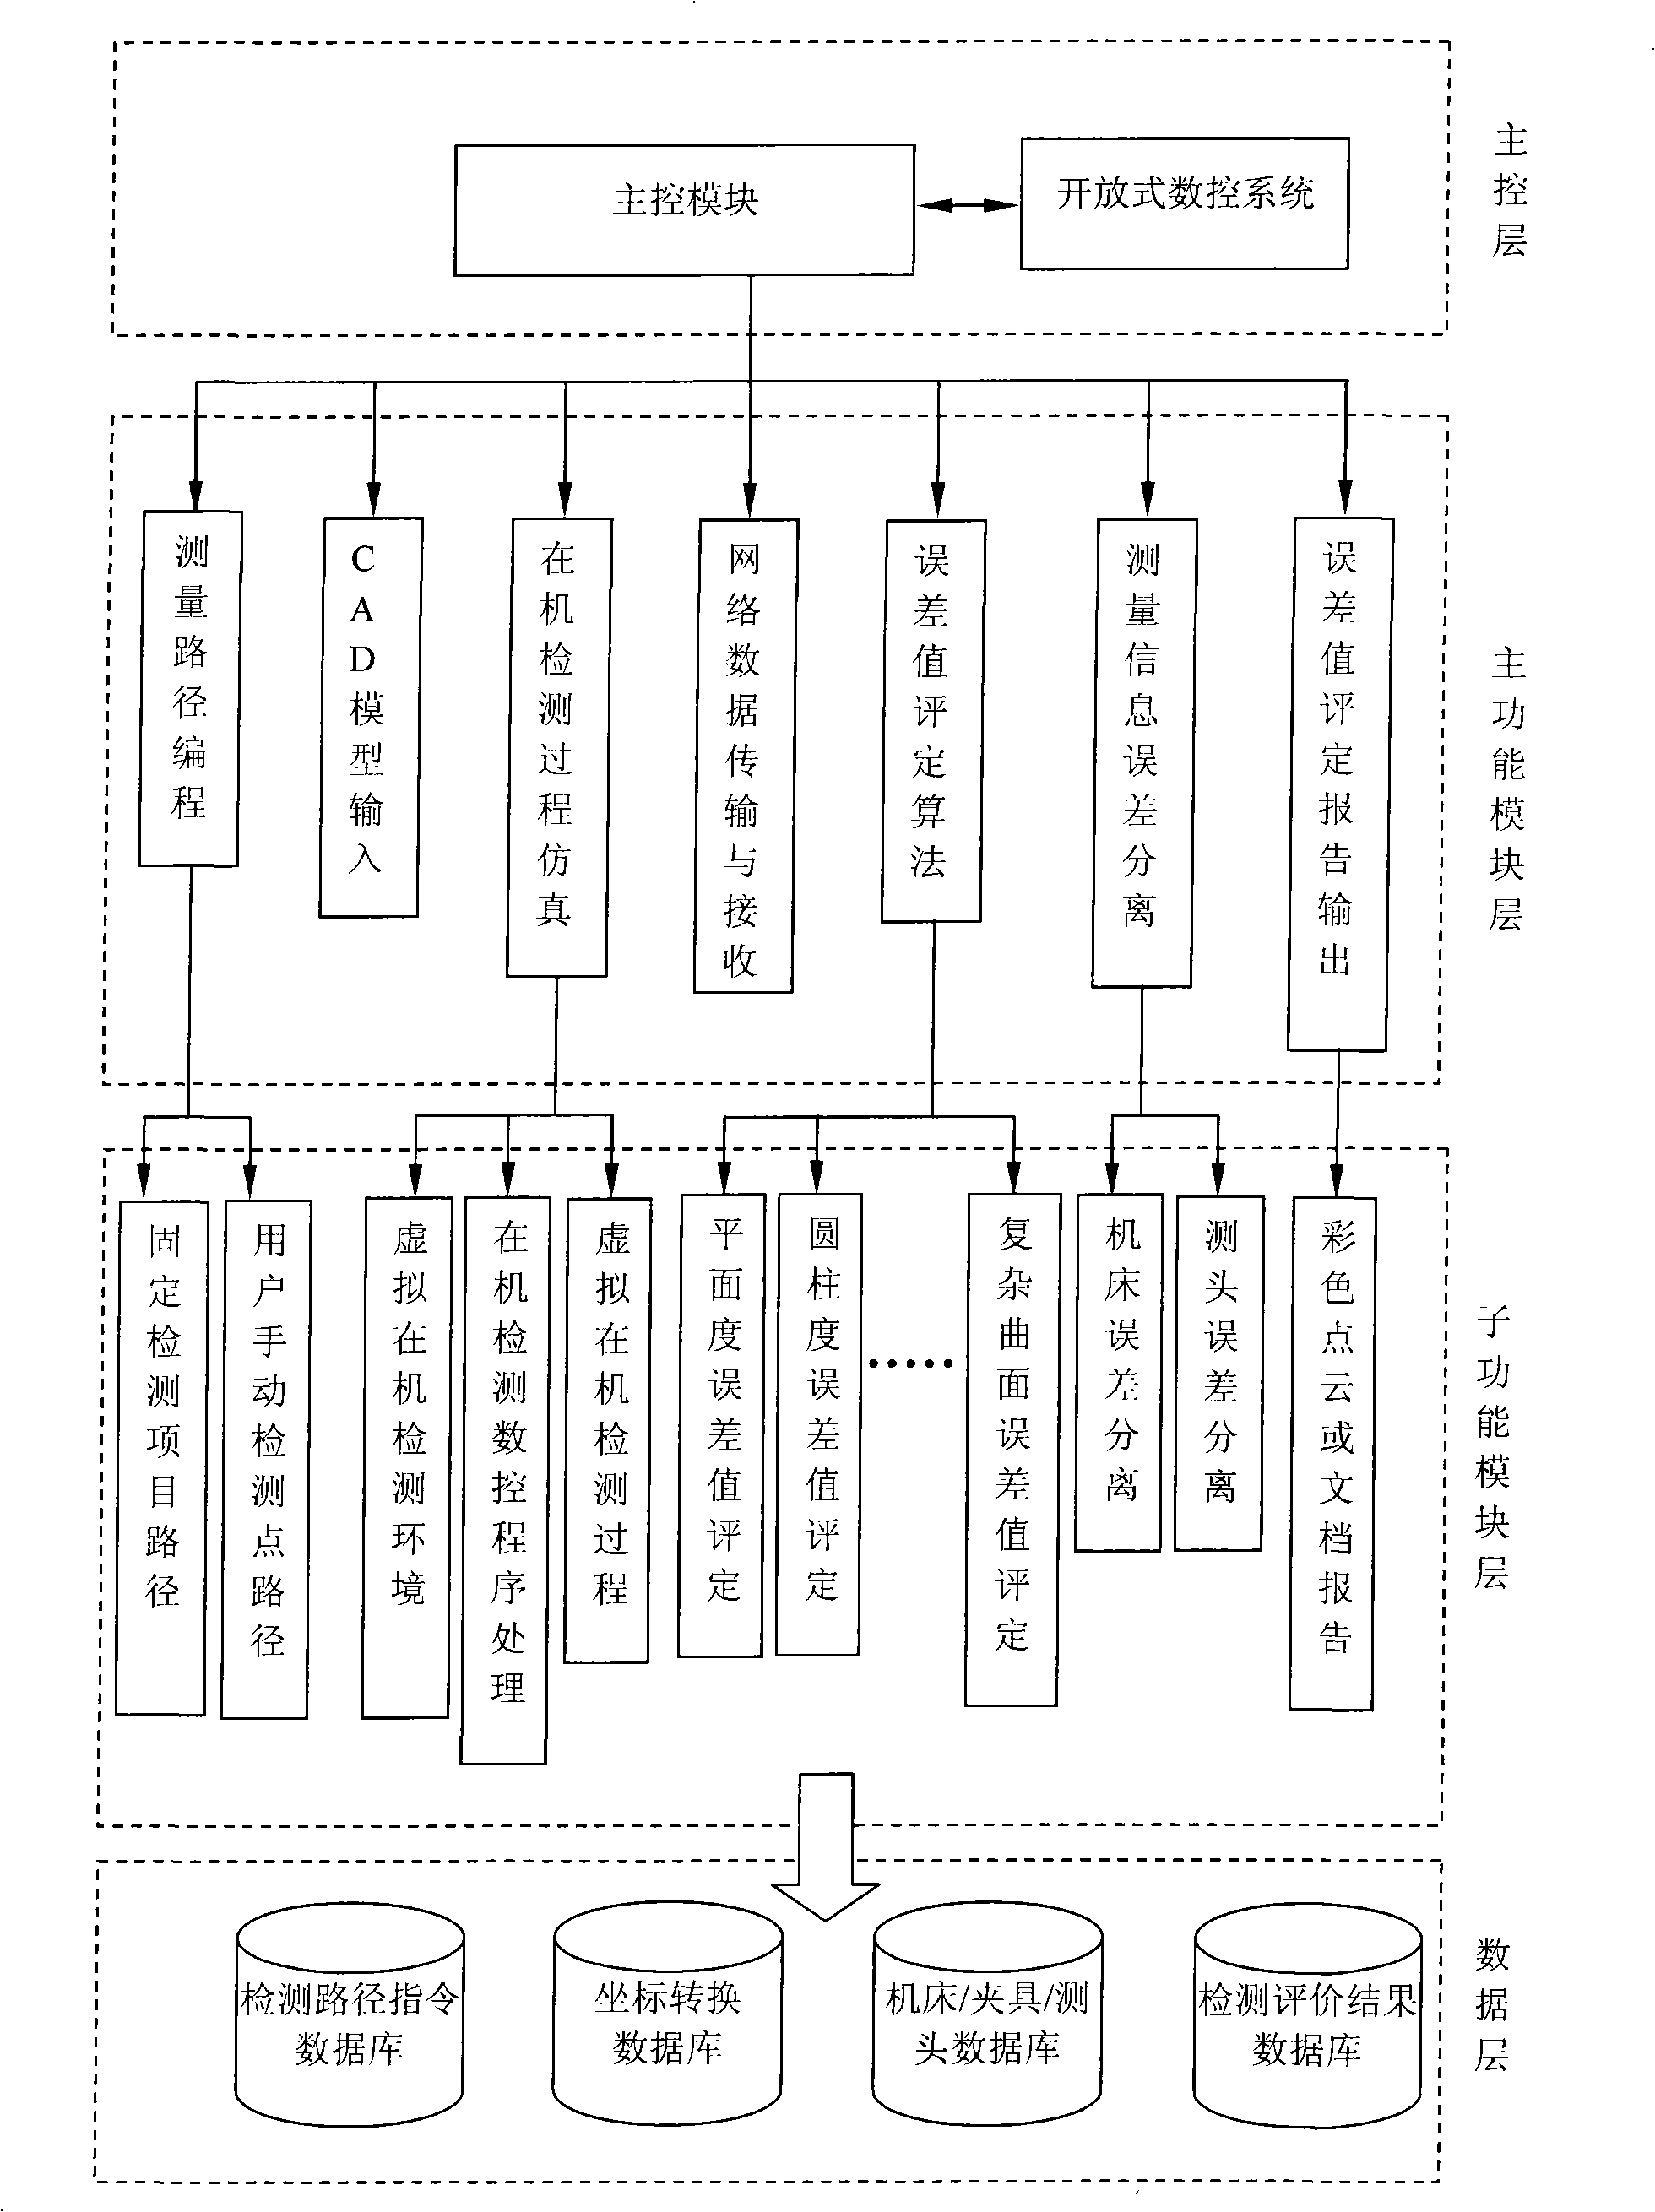 On-machine quality detecting system for complex space type surface